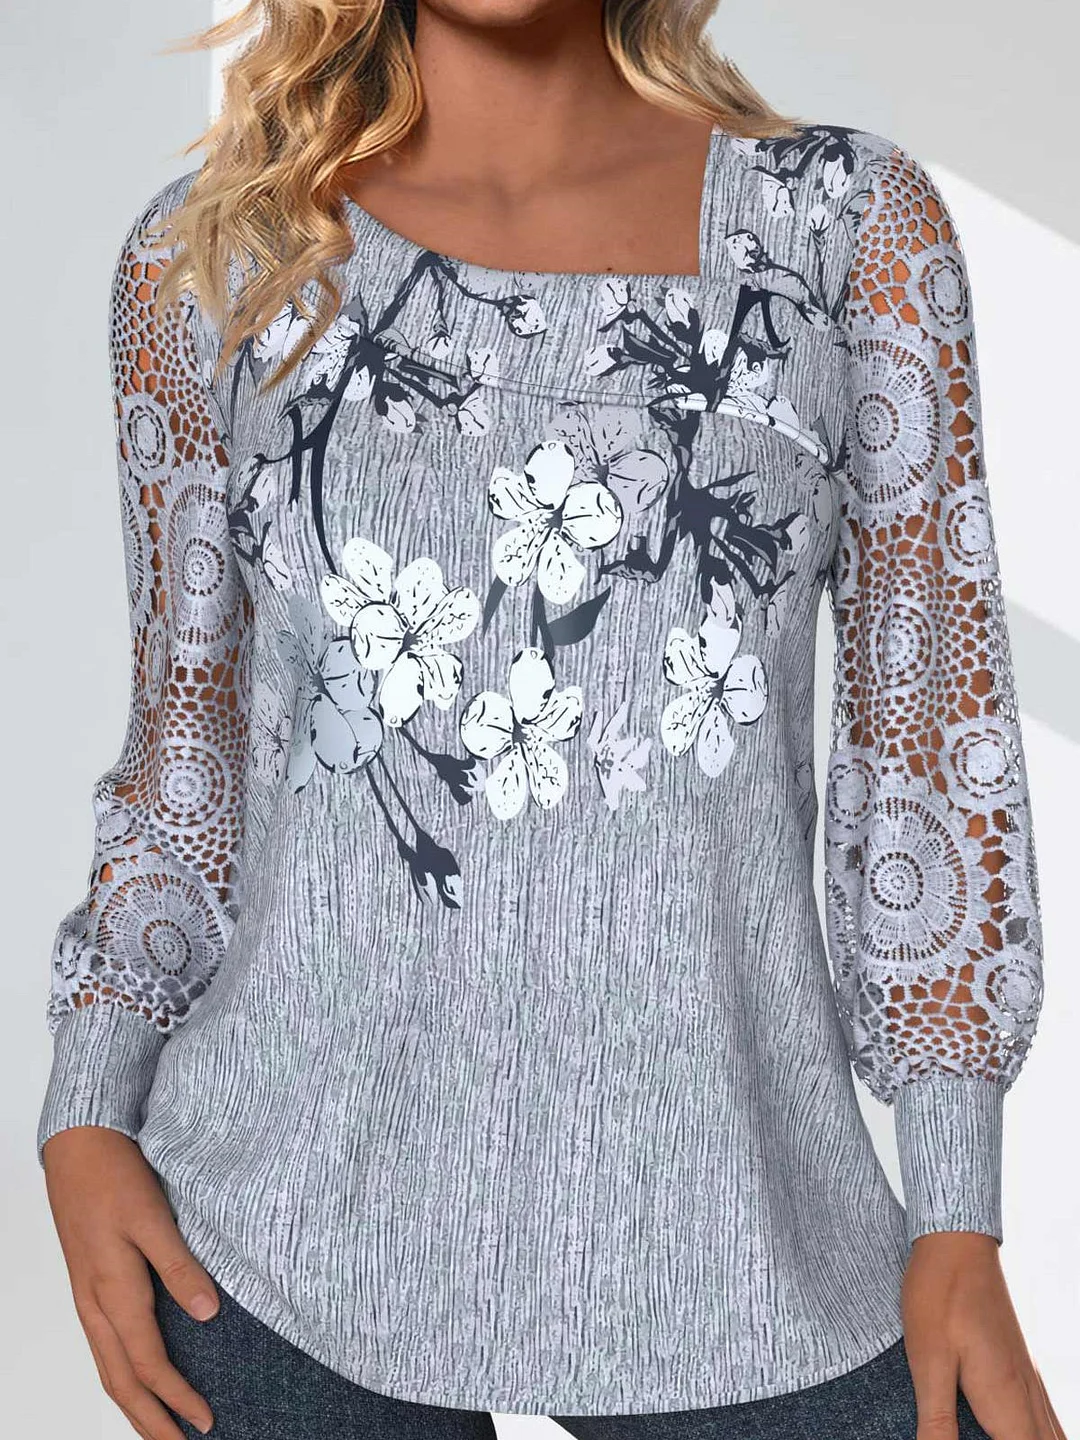 Women plus size clothing Women Long Sleeve Asymmetrical Collar Floral Printed Graphic Lace Tops-Nordswear